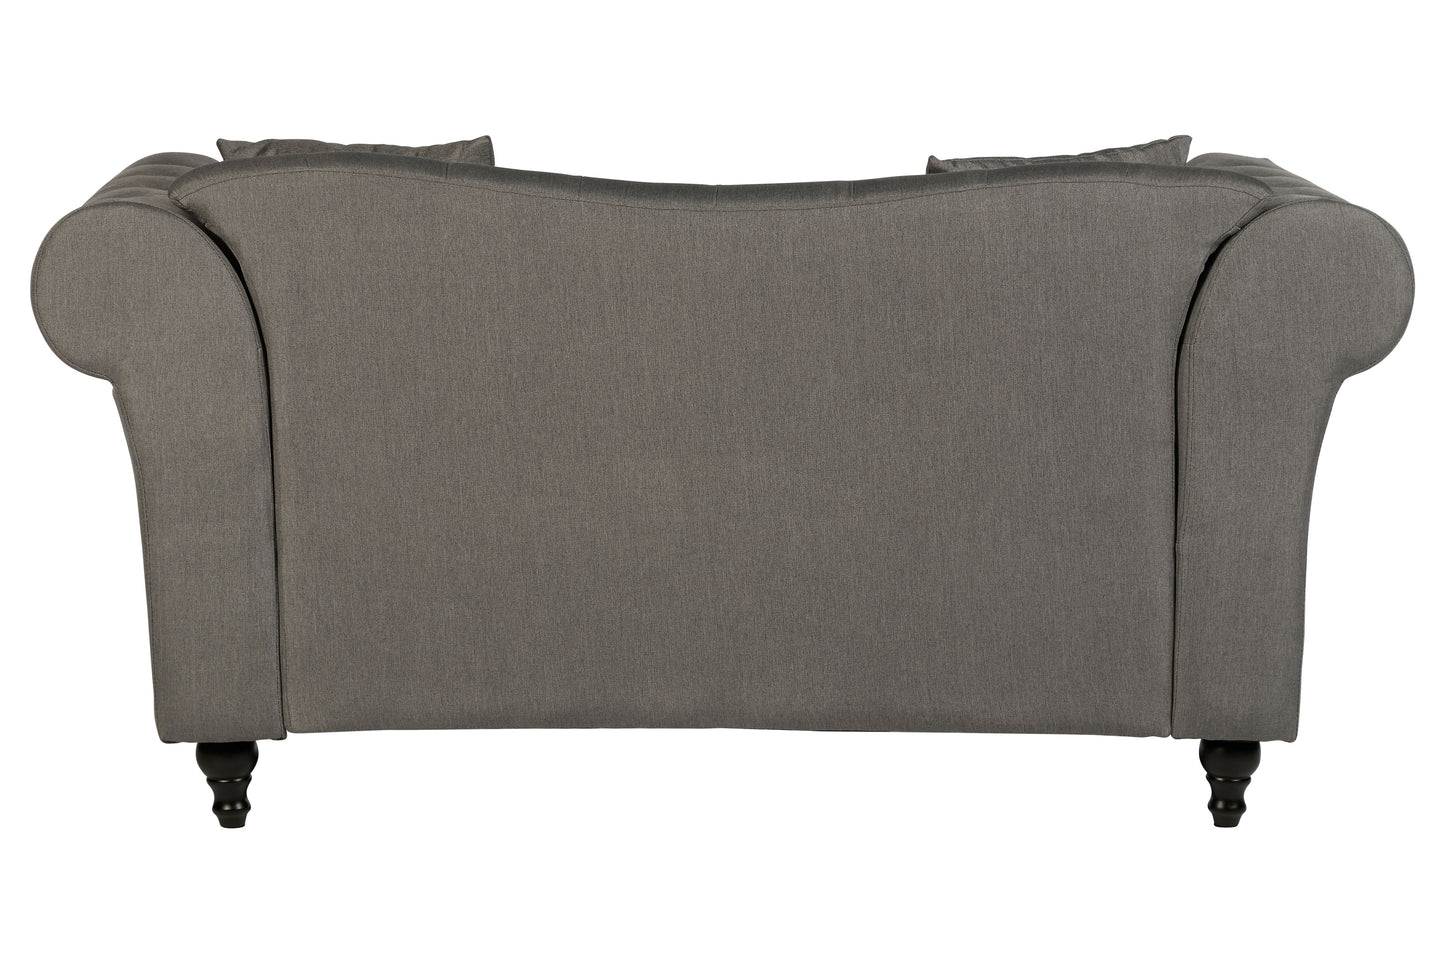 Fable Upholstered 2 Seat Chesterfield Sofa - NIXO Furniture.com